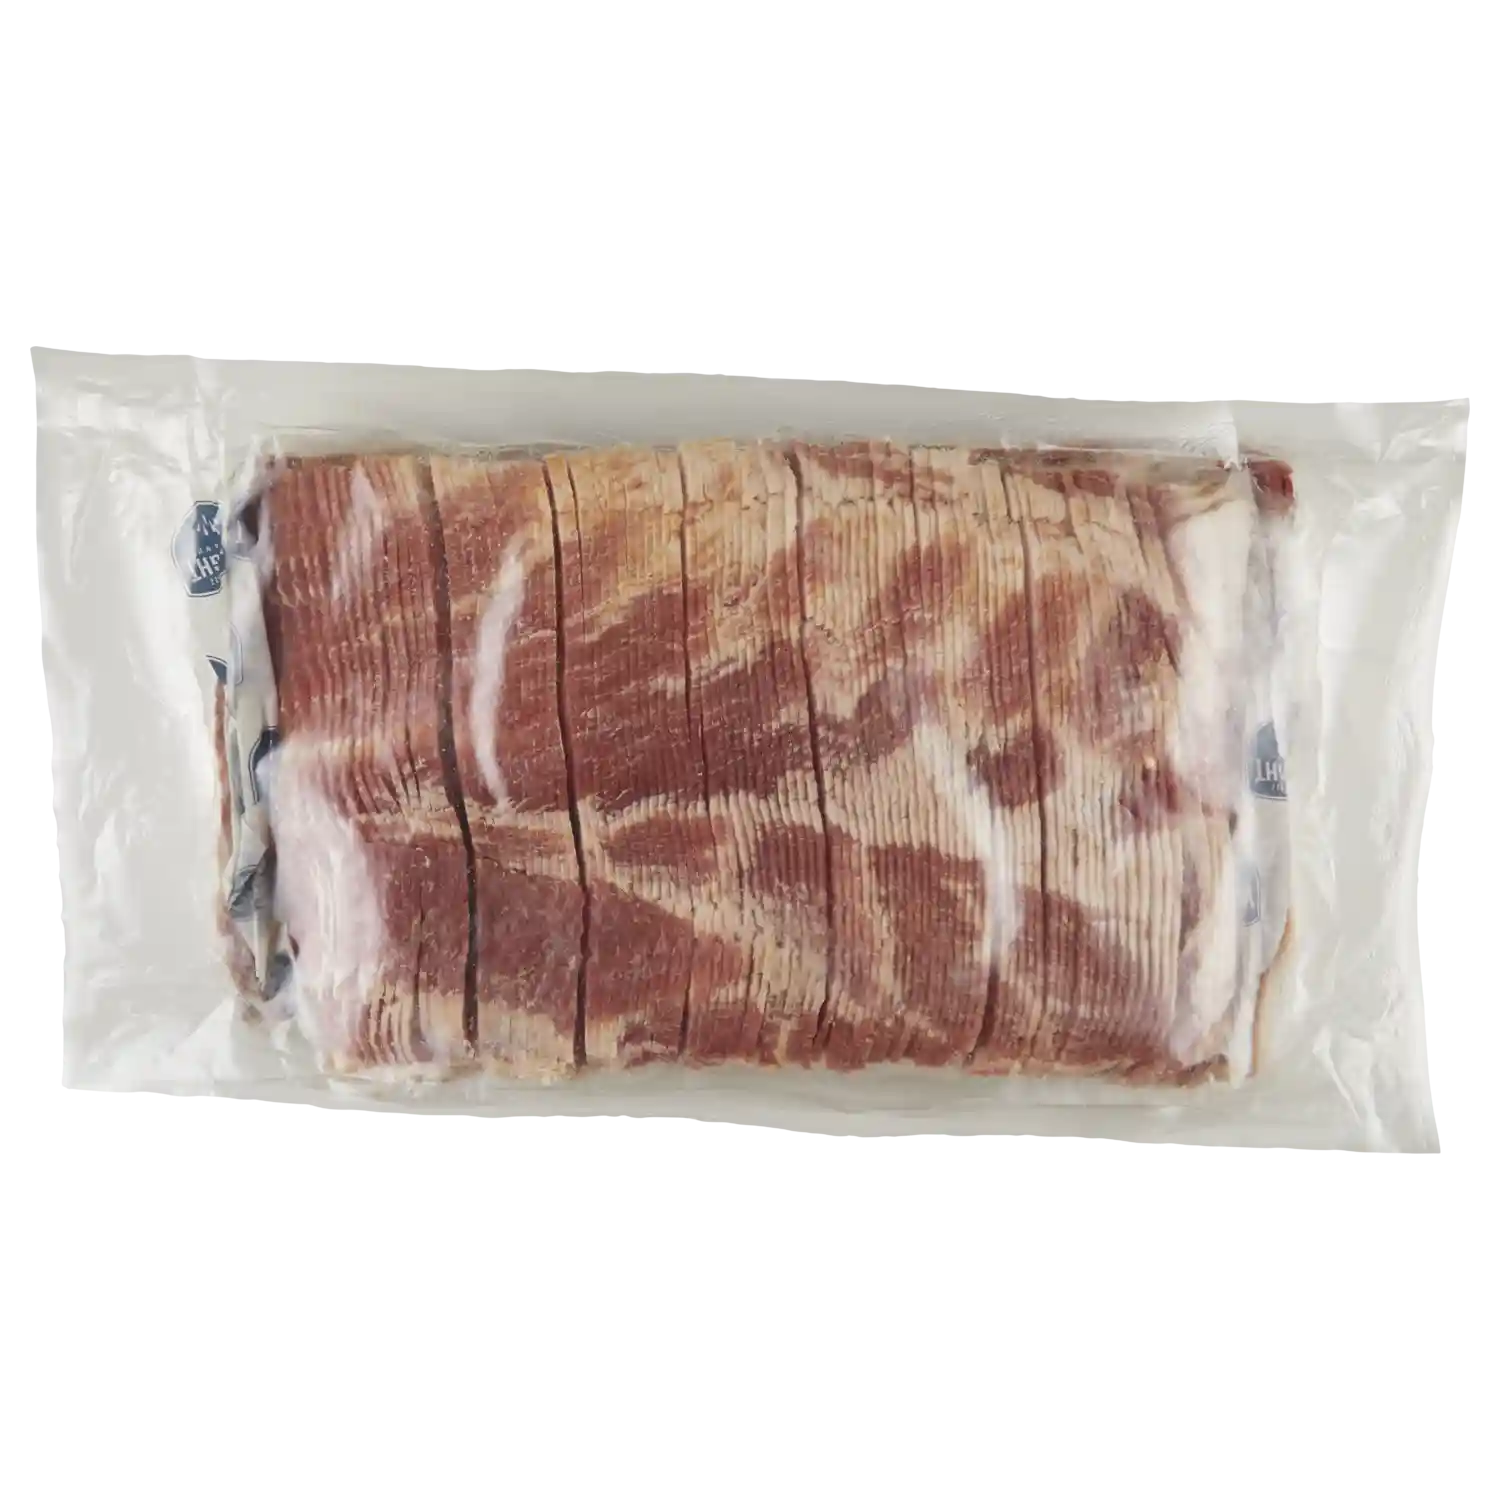 Wright® Brand Naturally Hickory Smoked Thin Sliced Bacon, Bulk, 30 Lbs, 18-22 Slices per Pound, Gas Flushed_image_21